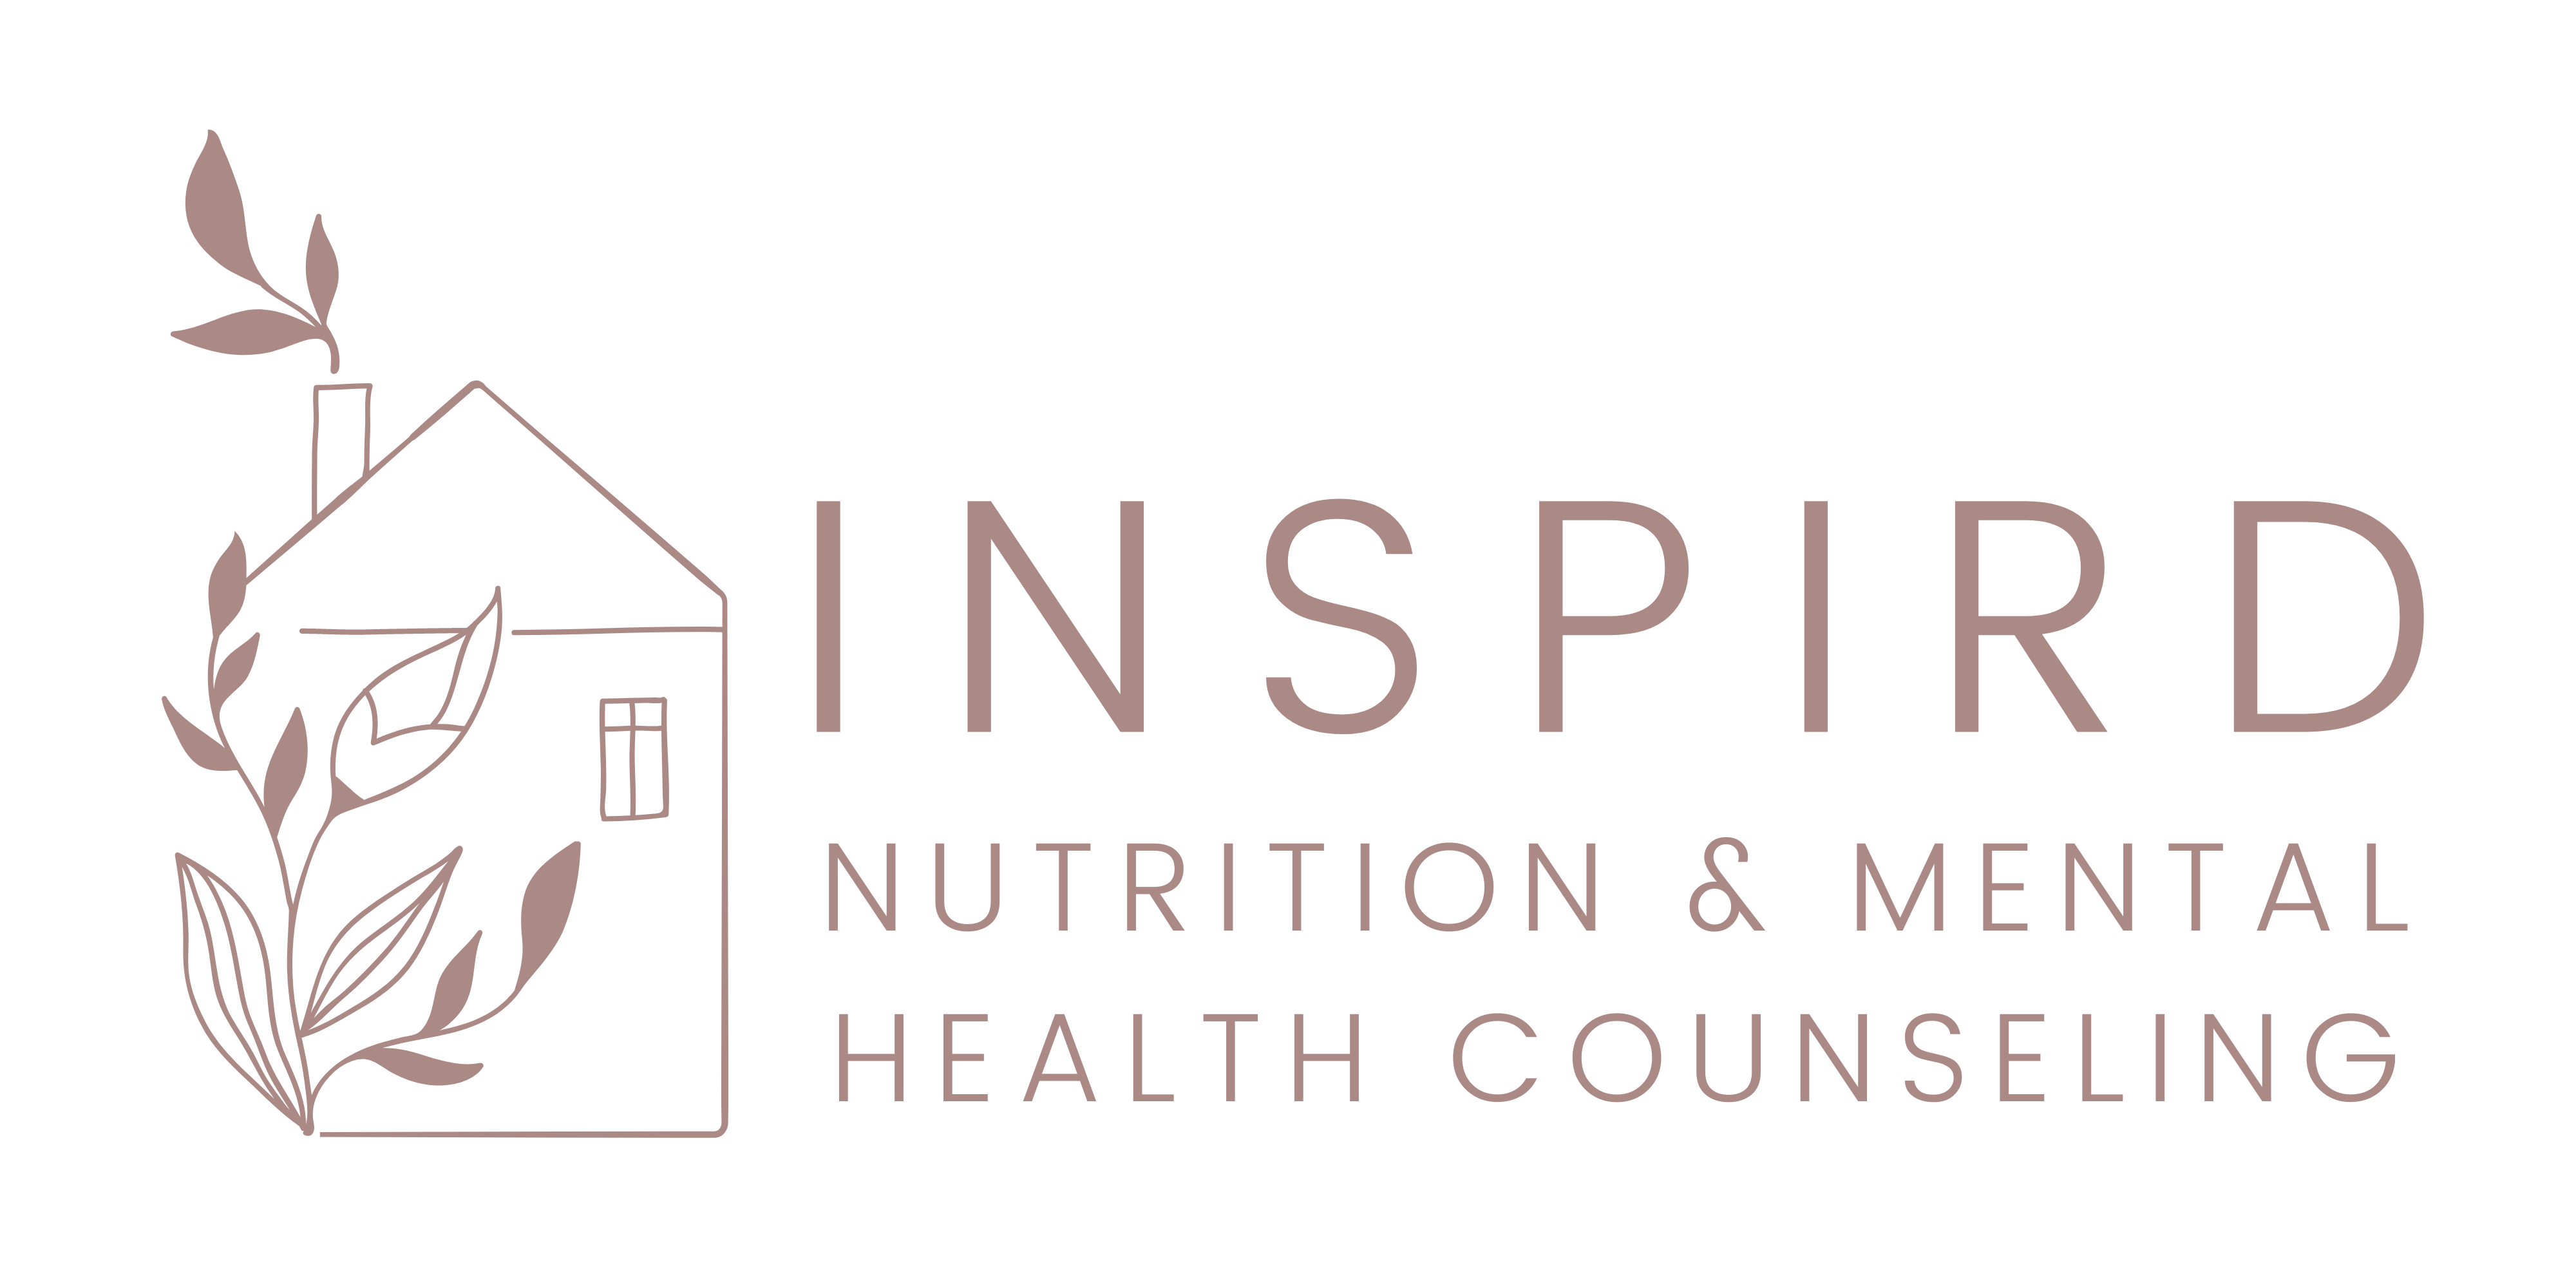 INSPIRD Nutrition & Mental Health Counseling